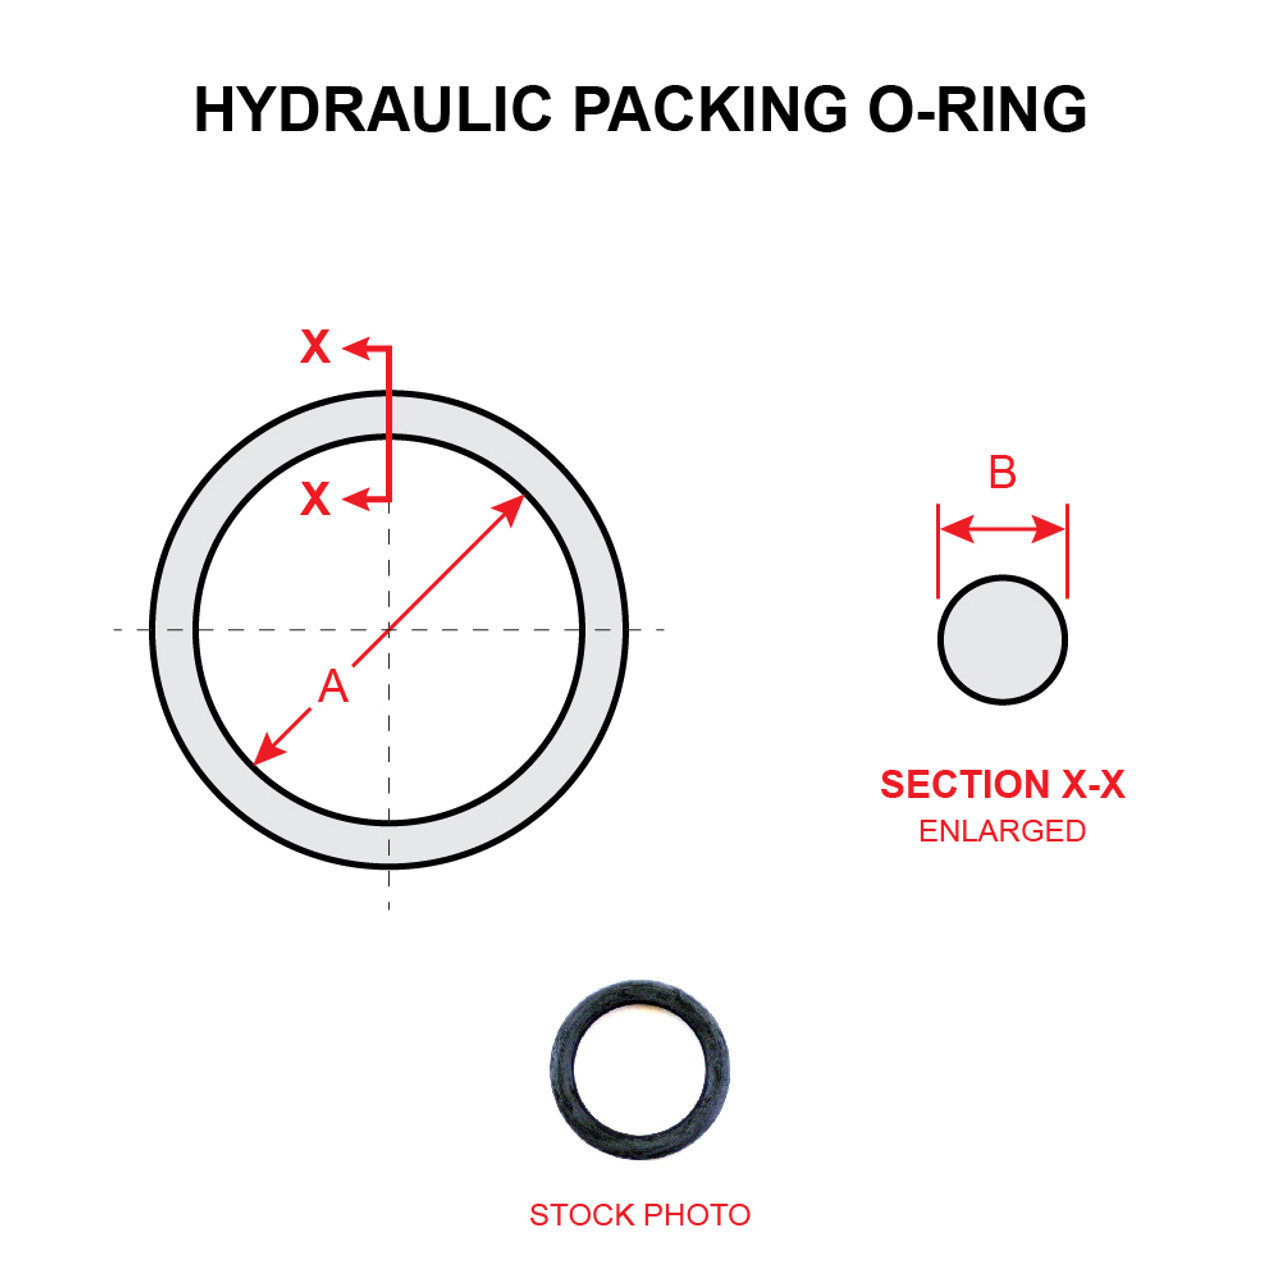 MS28775-215   HYDRAULIC PACKING O-RING